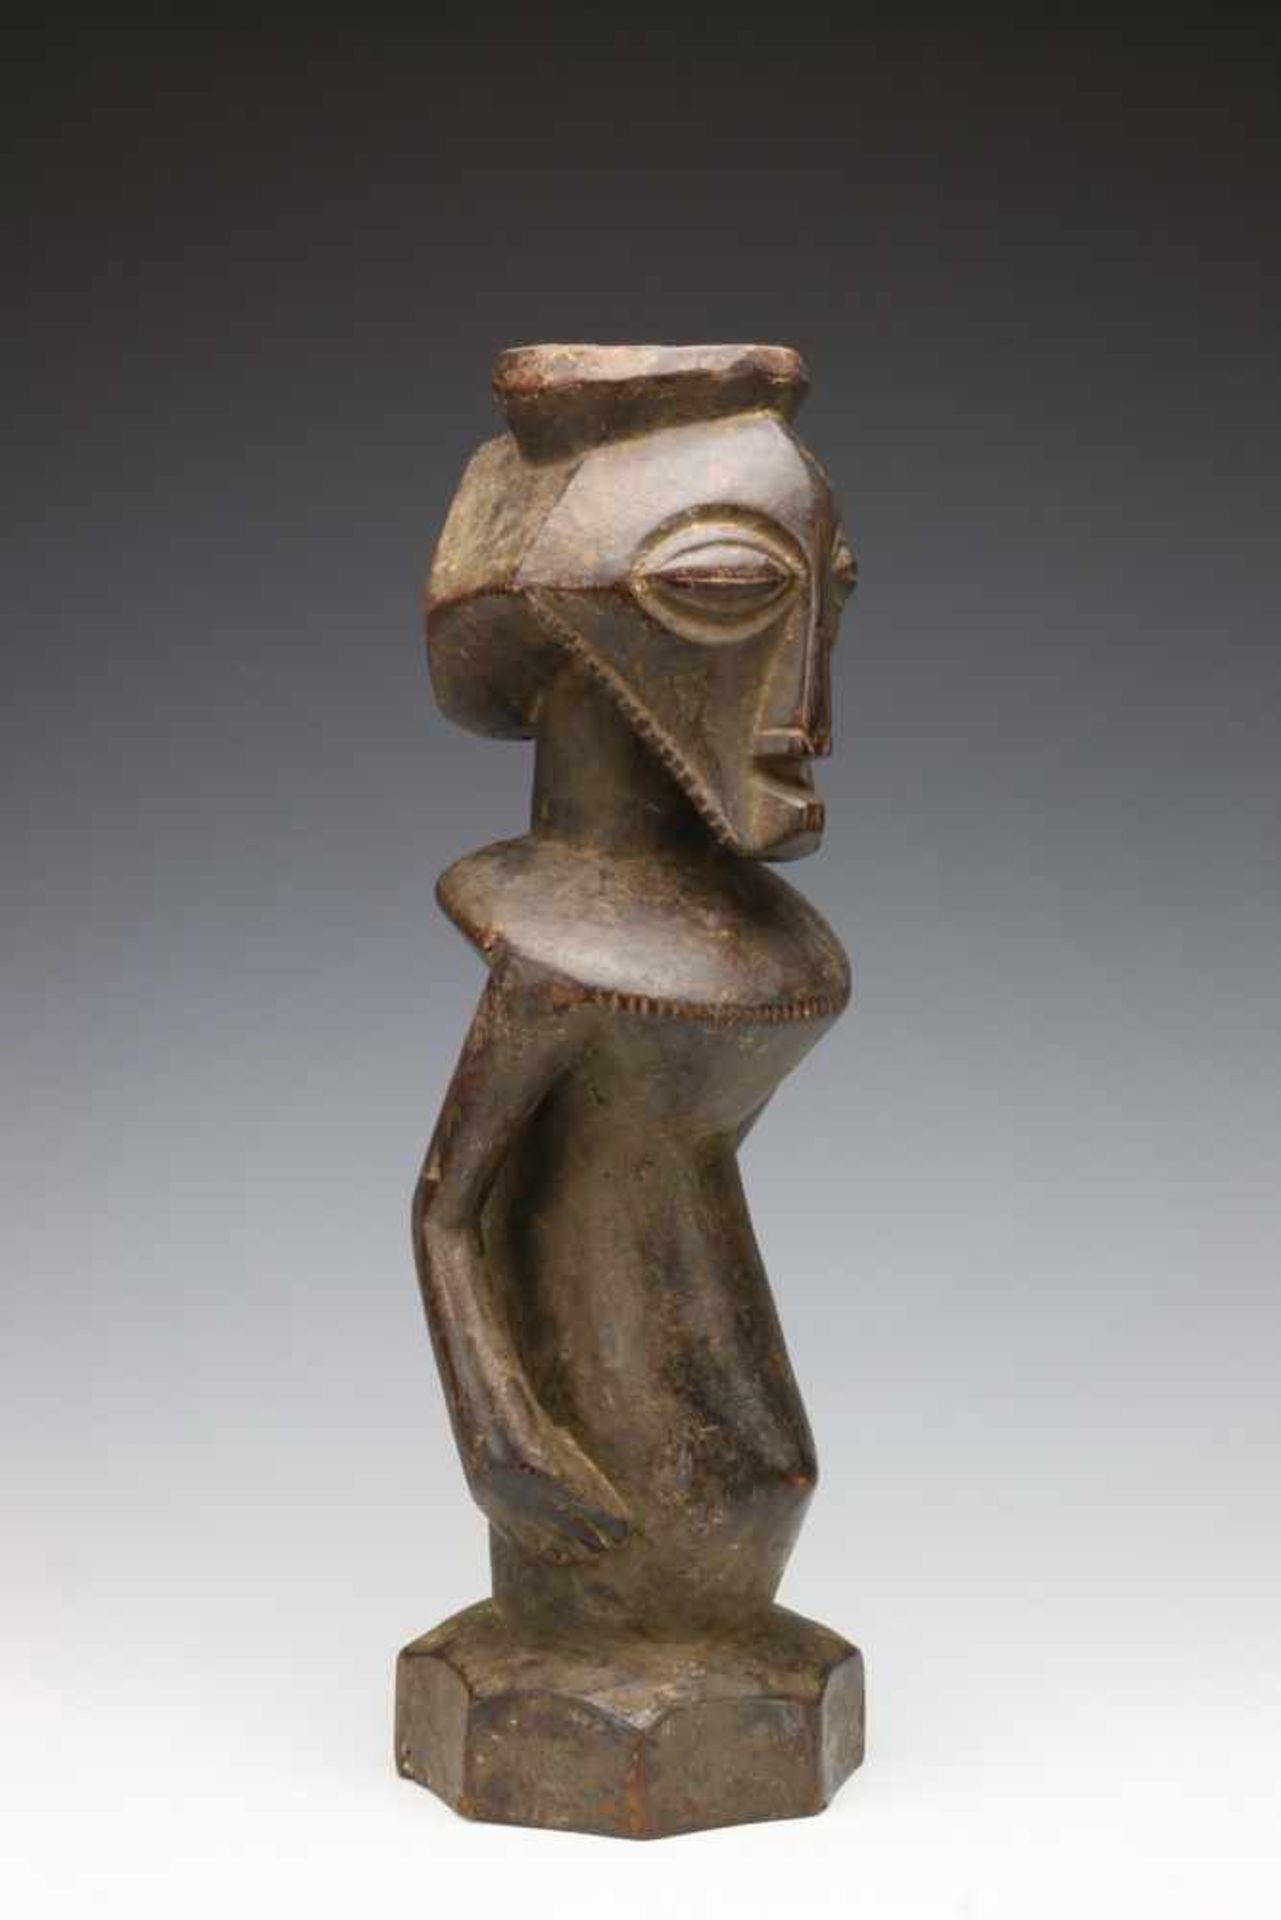 DRC., Bembe, half figure,with hole in head, beard, indentations round the shoulders and a base